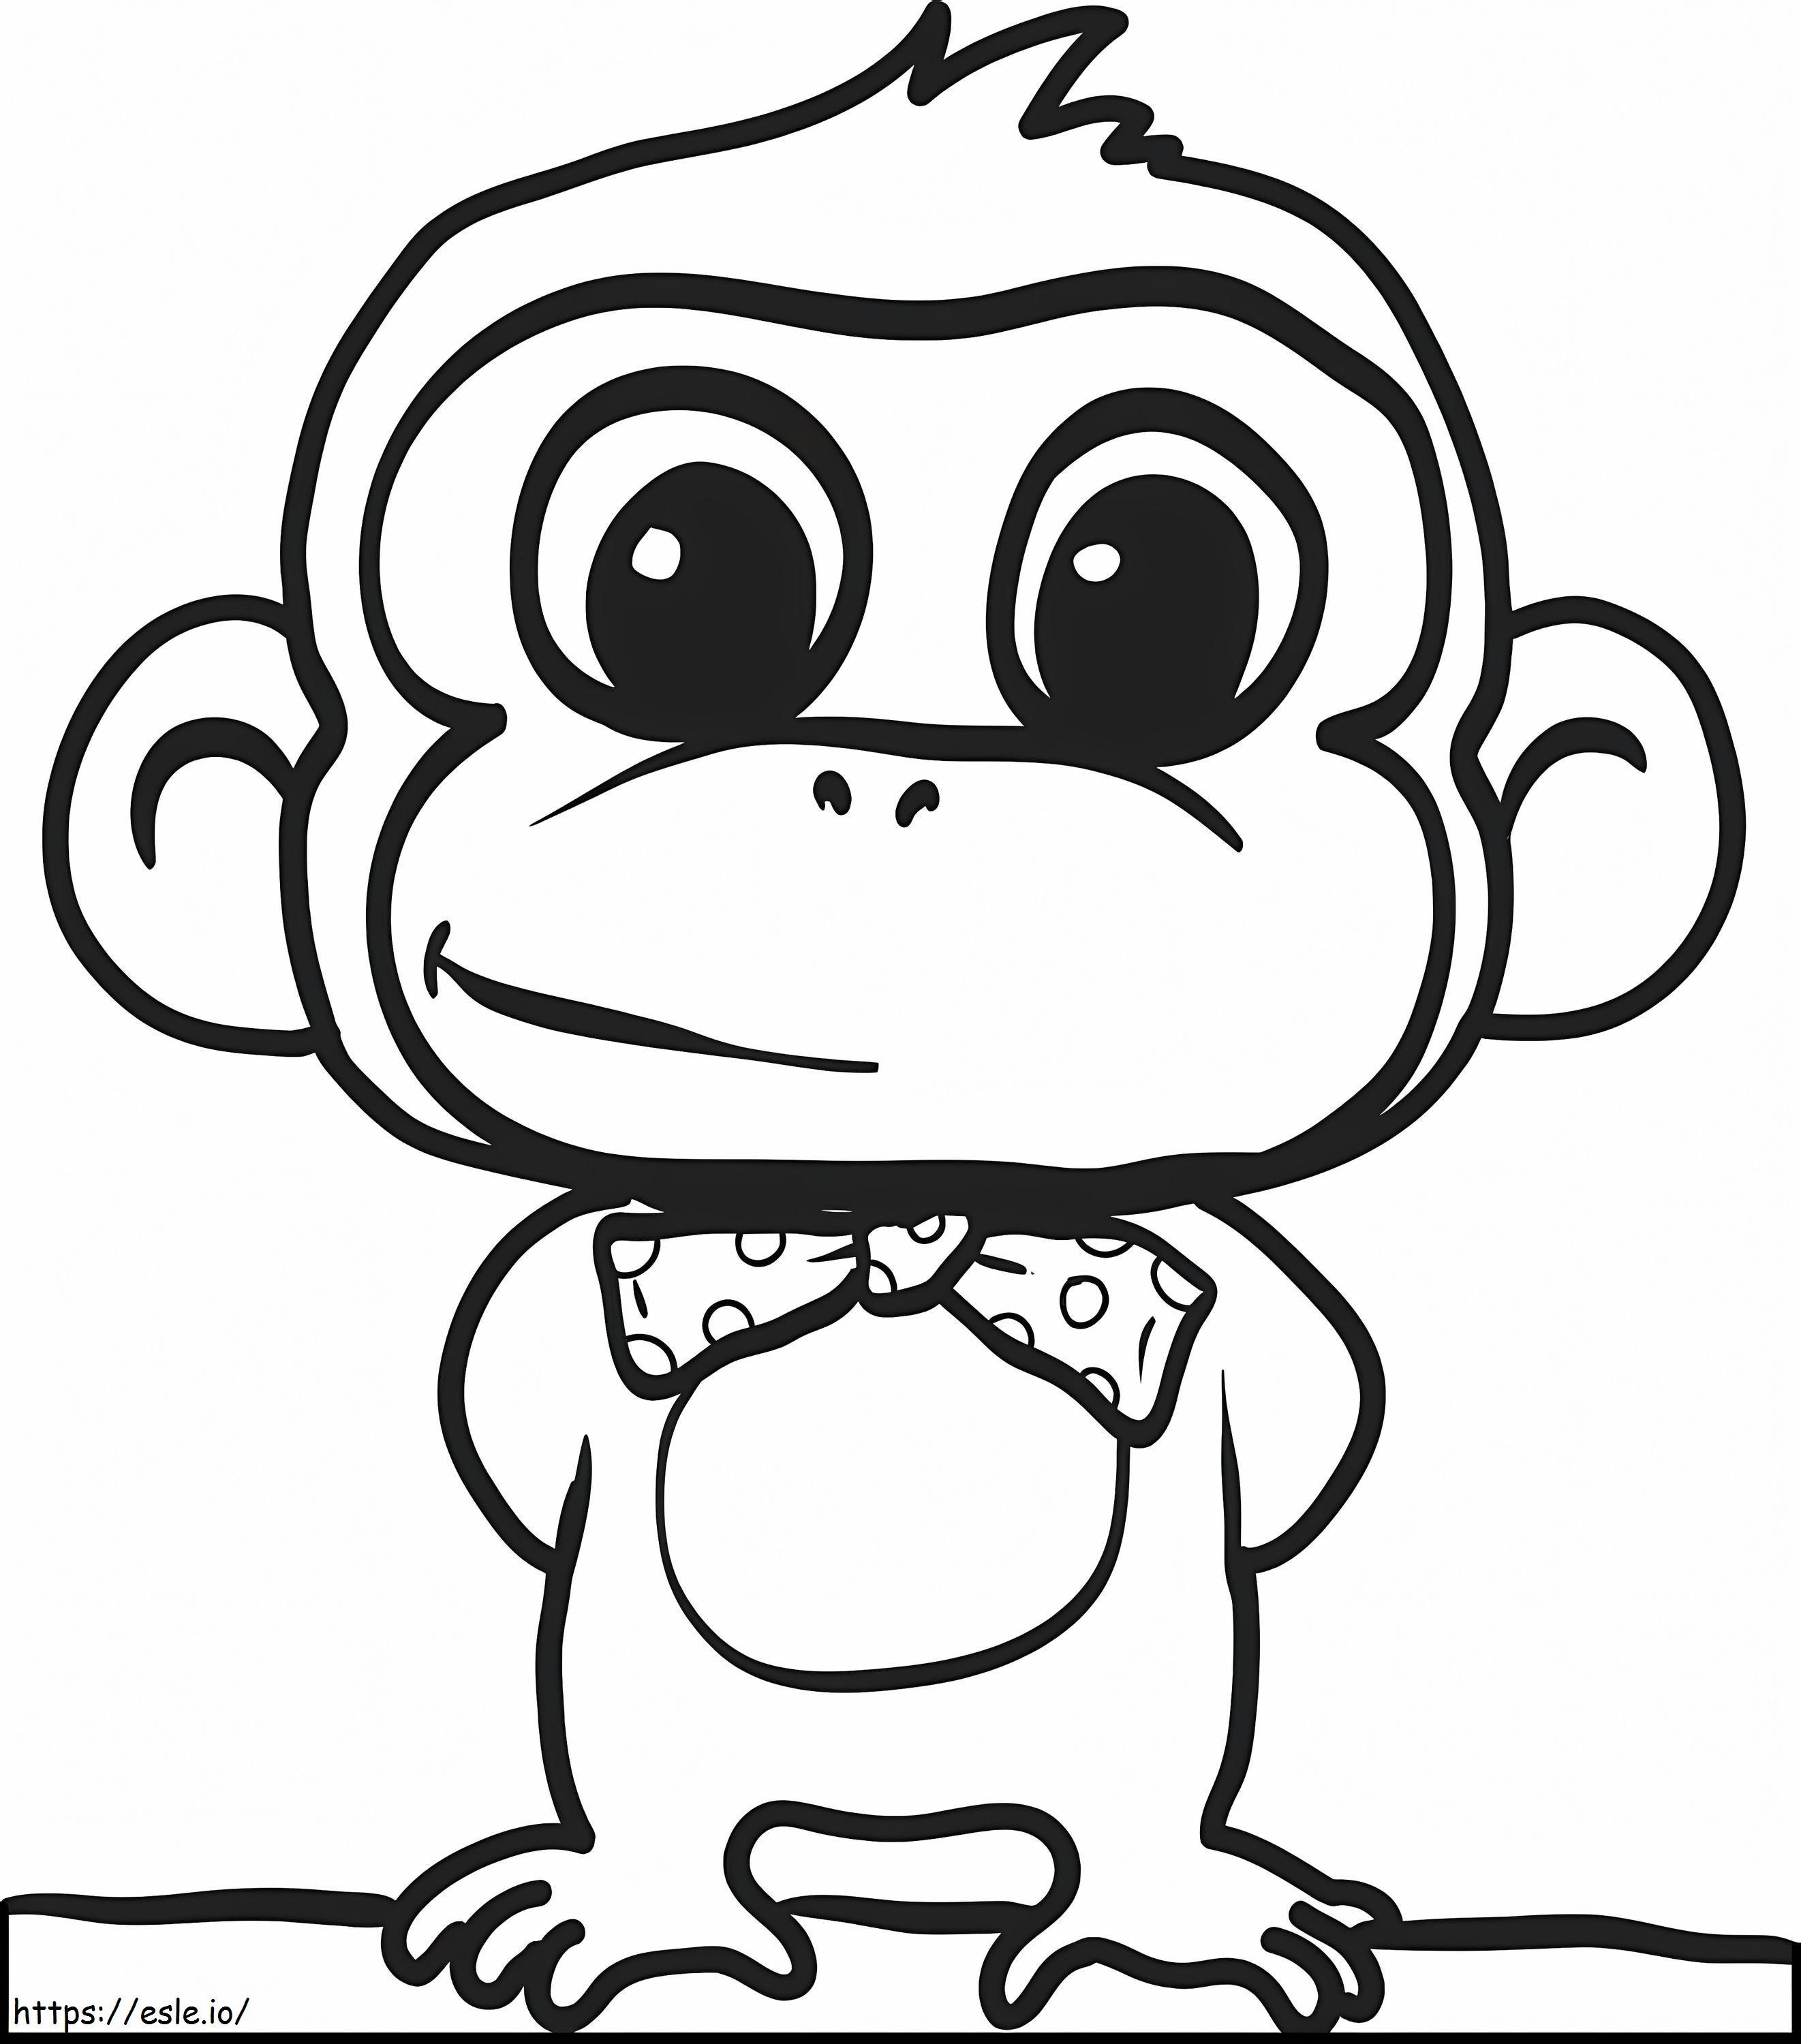 Gentle Monkey coloring page